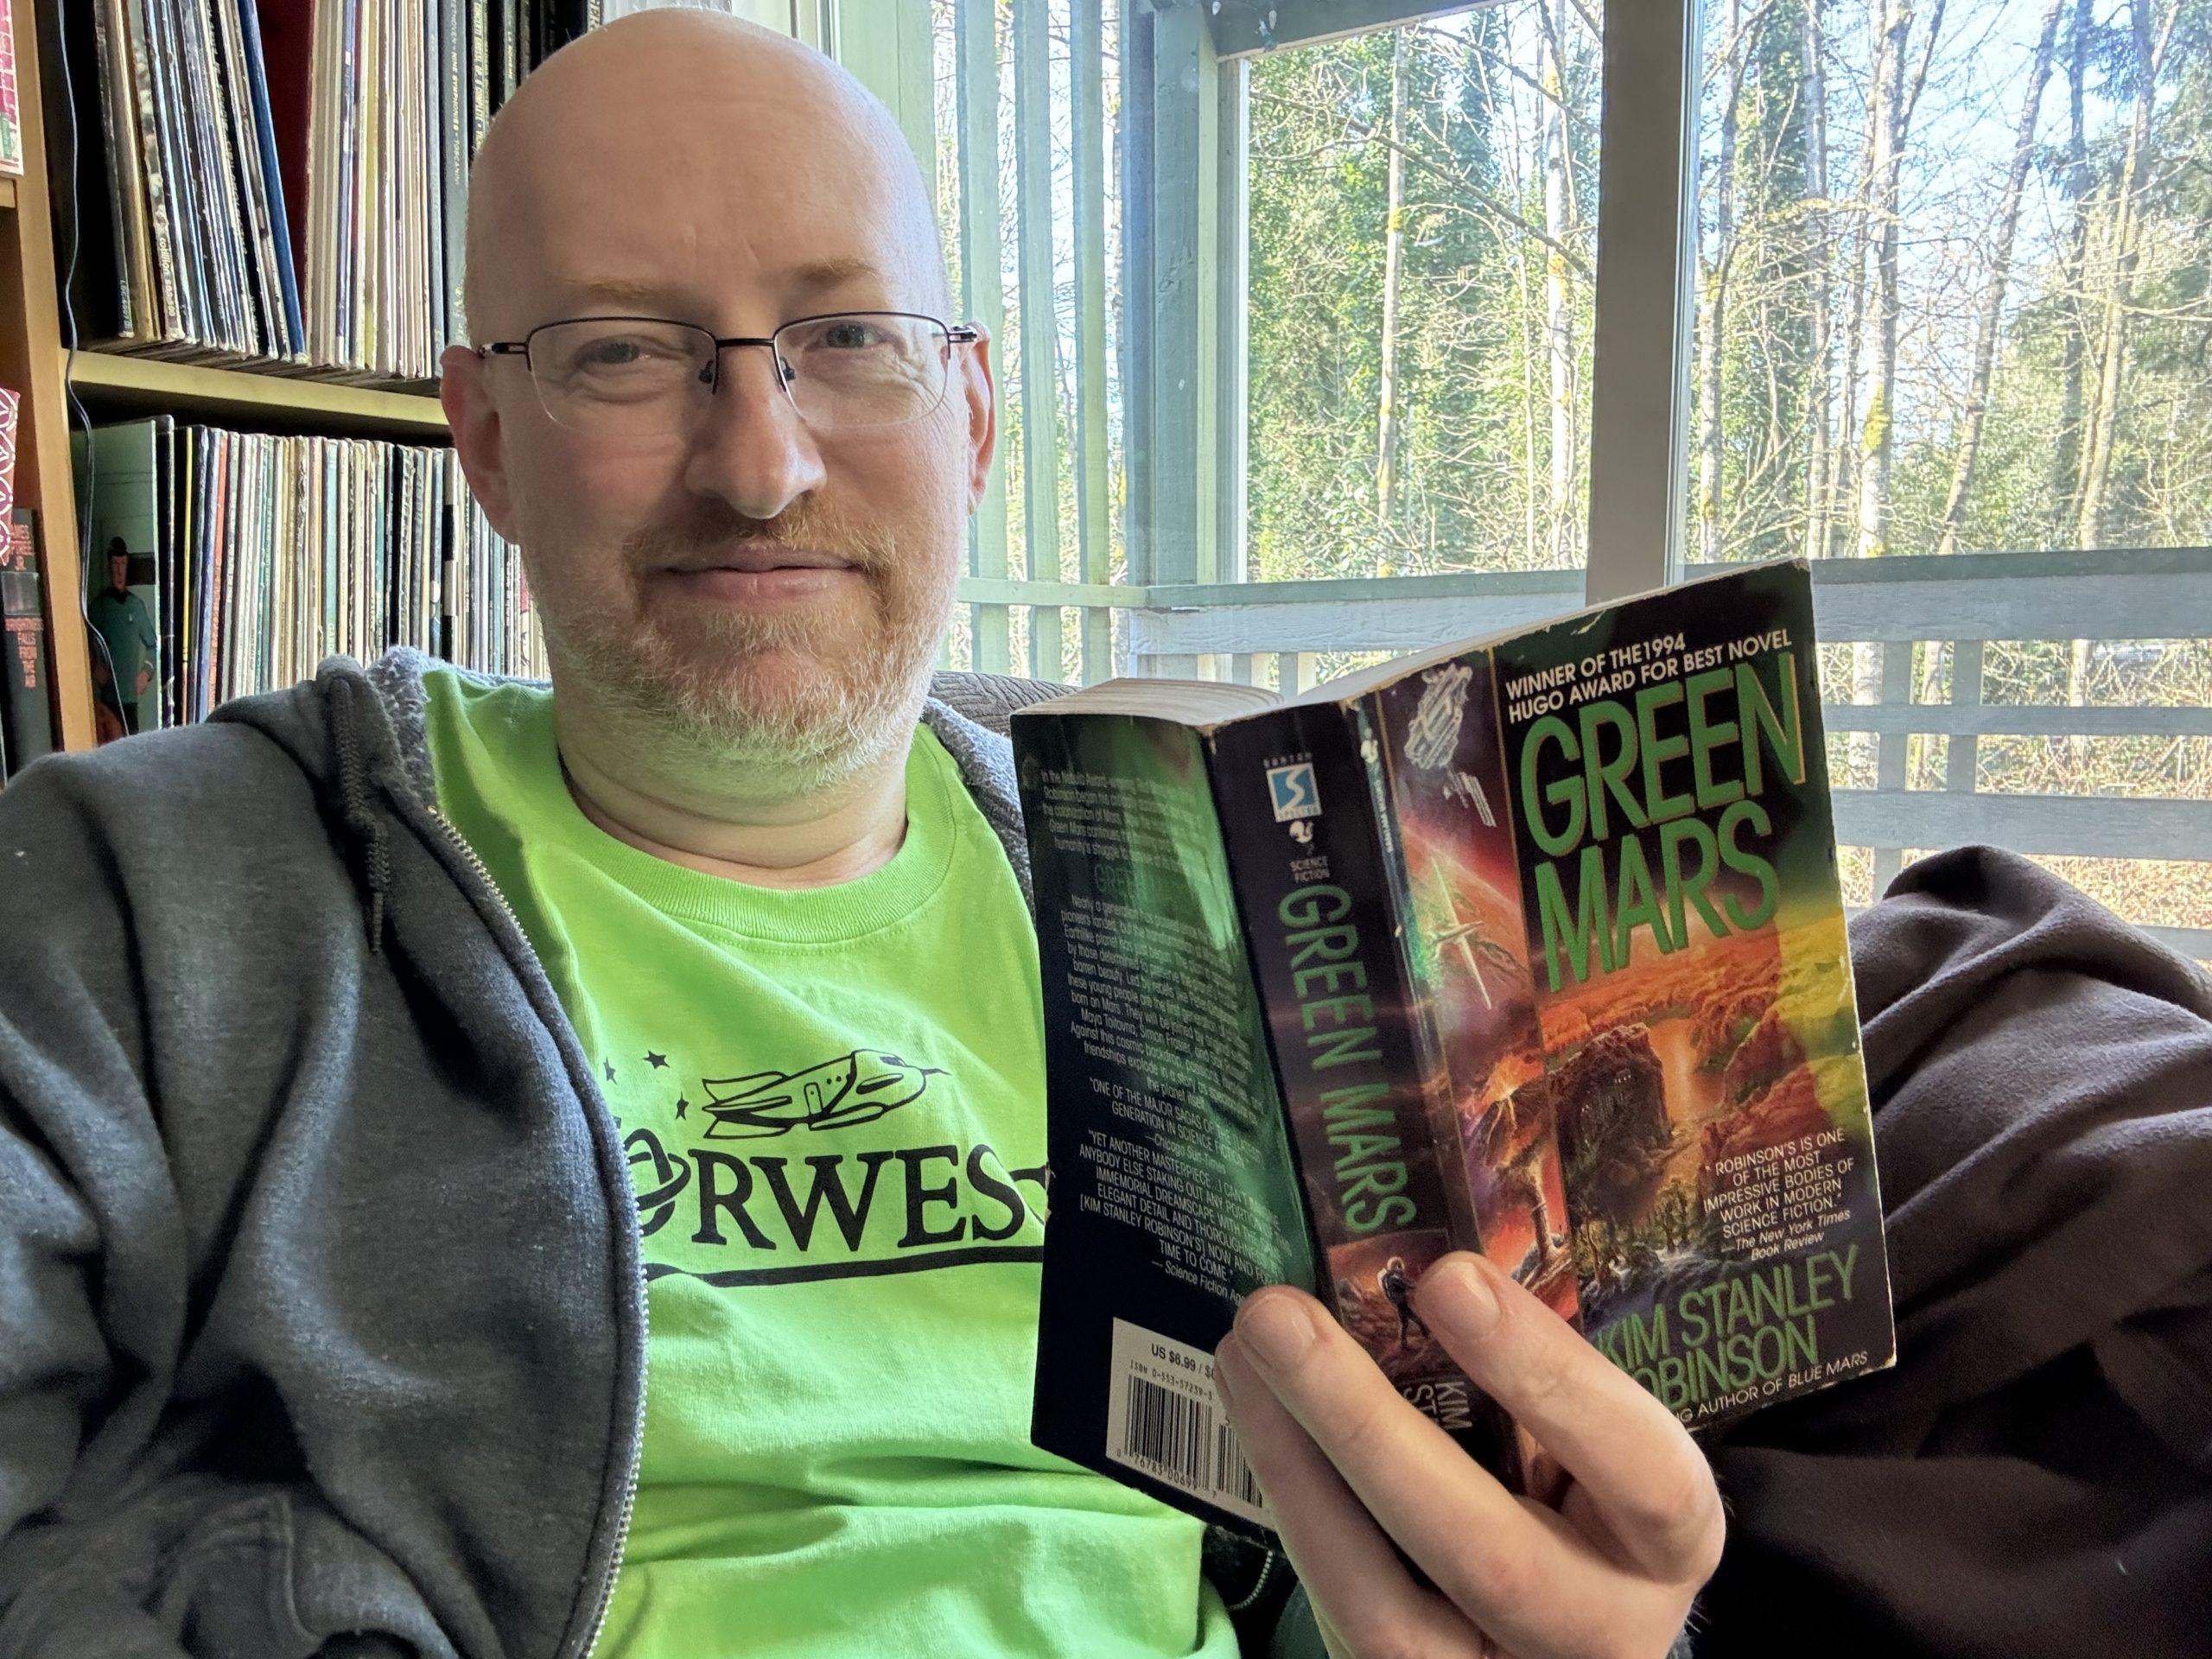 Me wearing a bright green Norwescon shirt and holding Kim Stanley Robinson's book Green Mars.